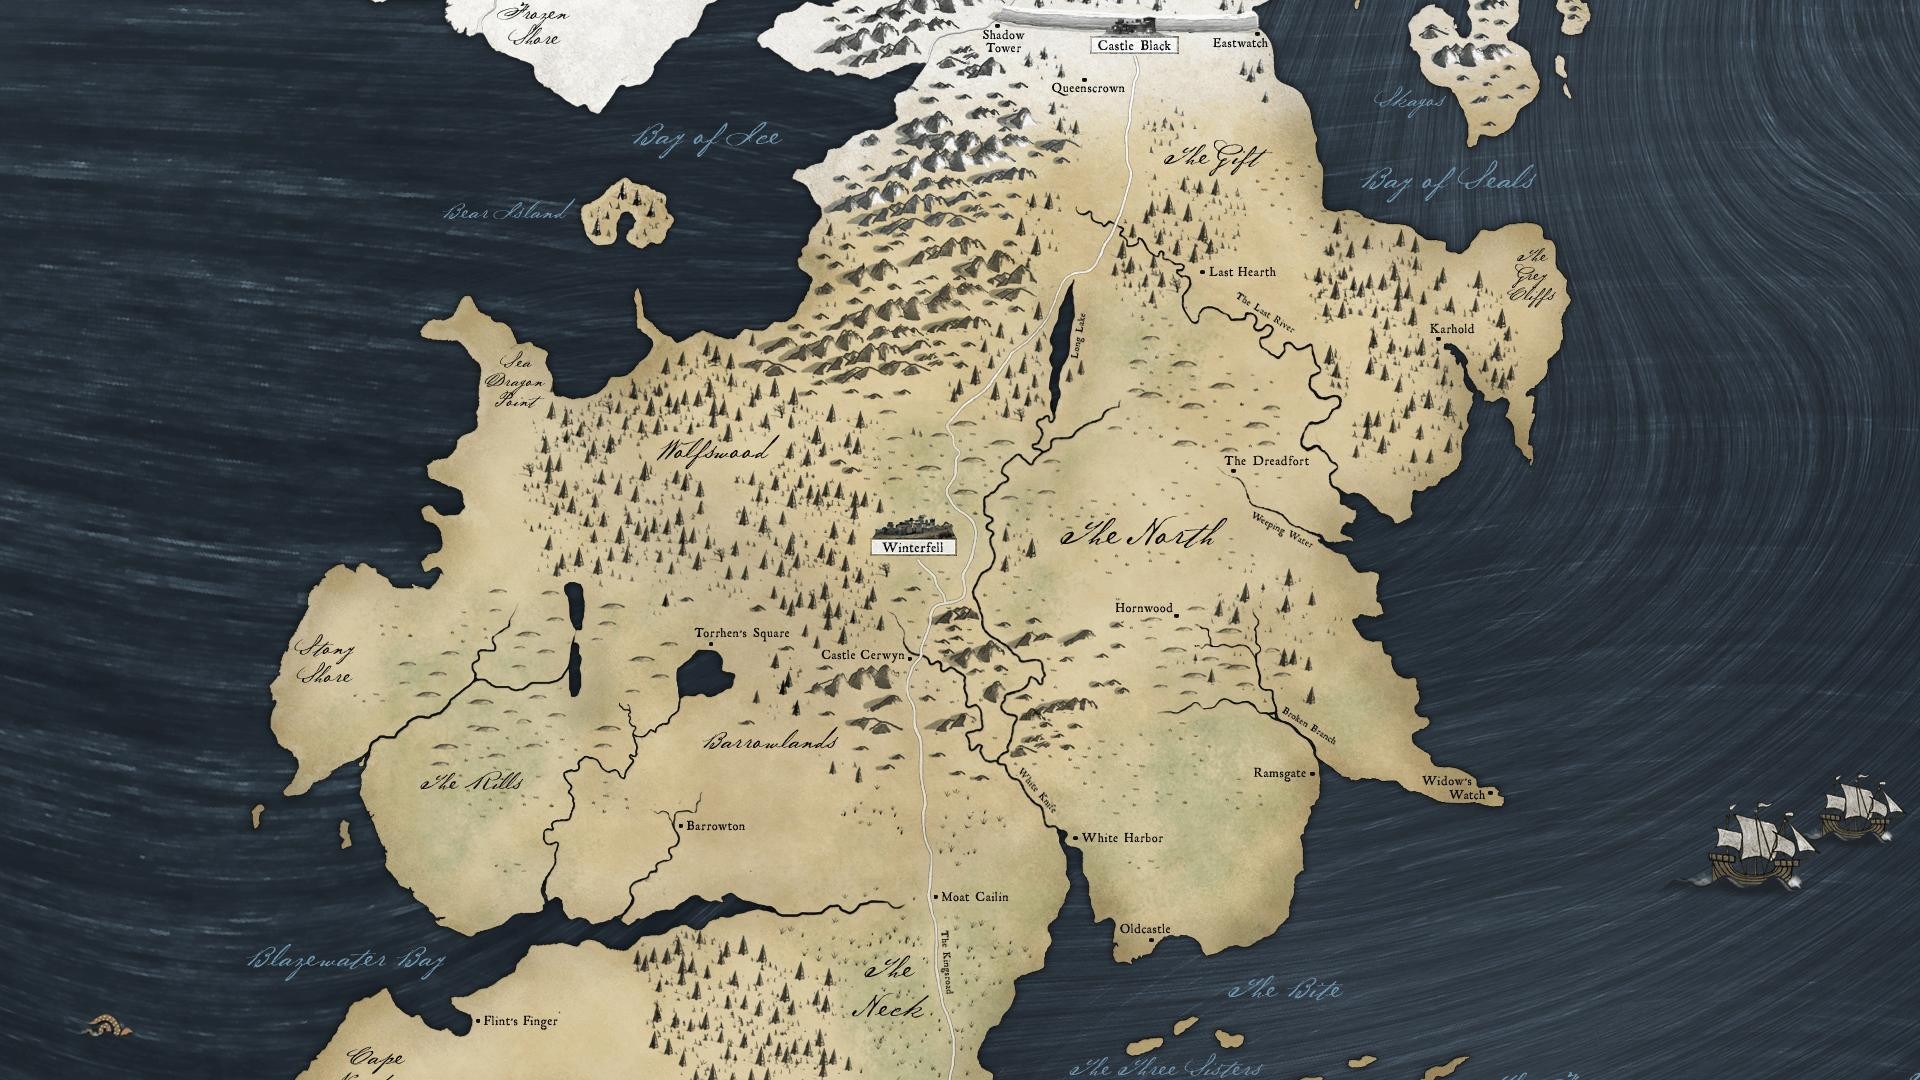 General 1920x1080 Game of Thrones map TV series